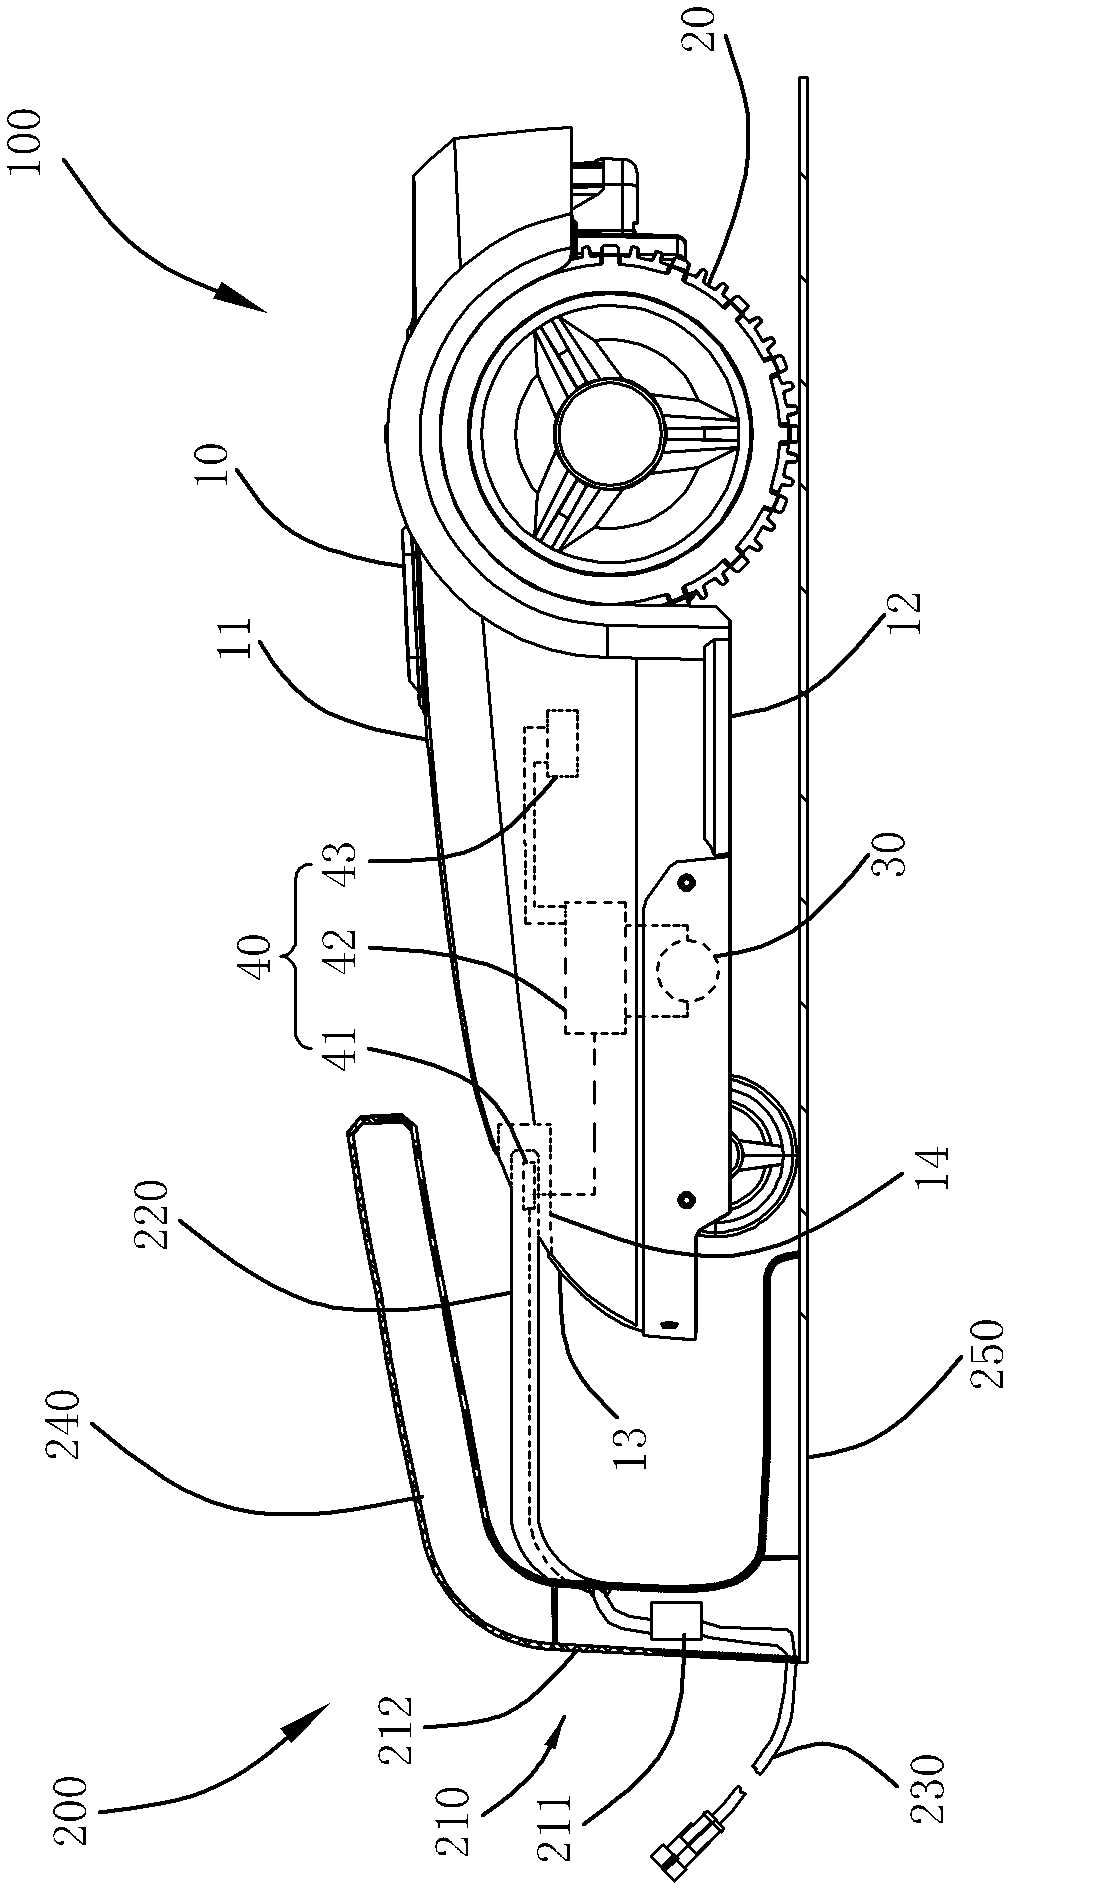 Mower and butt-joint charging system